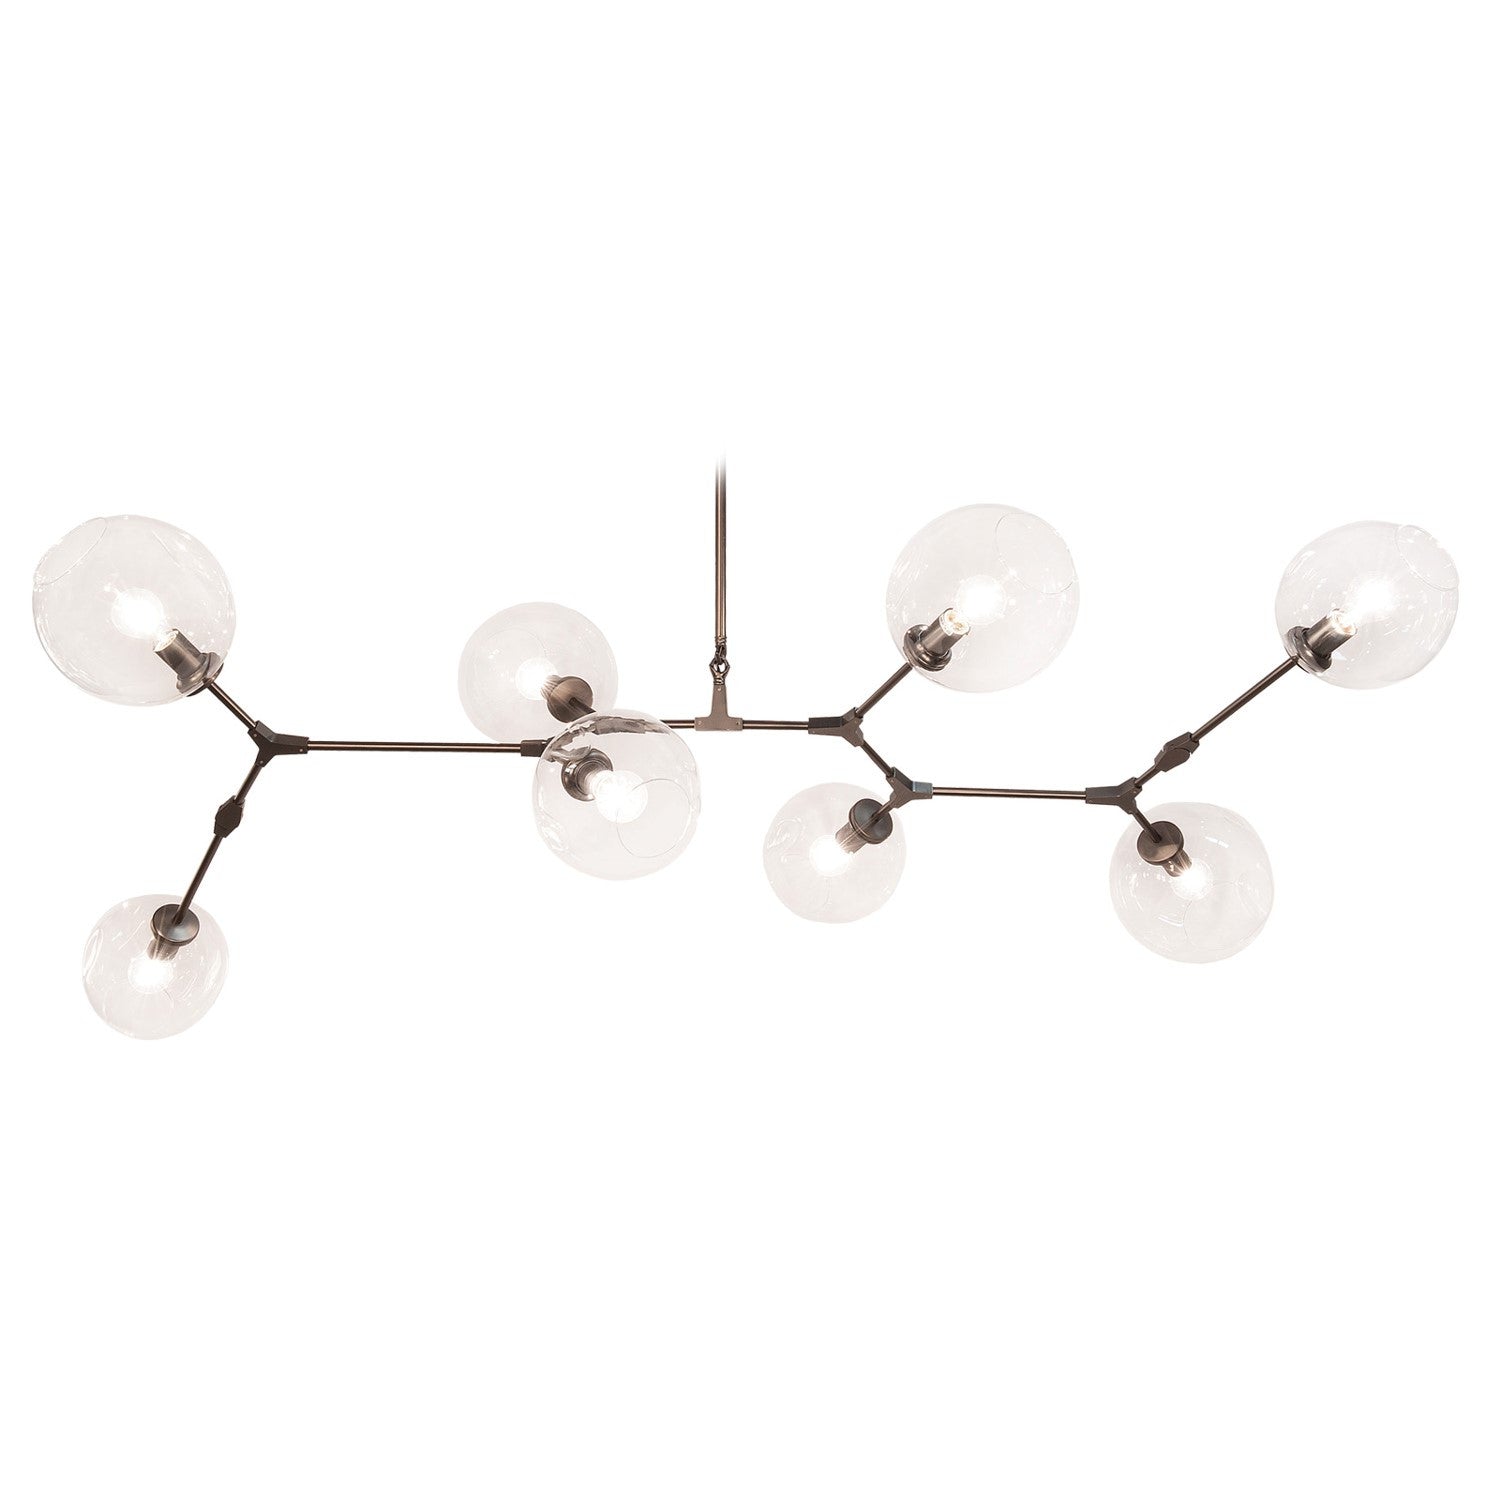 Fairfax Large Bronze Mid-Century Modern Linear Chandelier with Clear Glass Globes by Avenue Lighting HF8088-DBZ